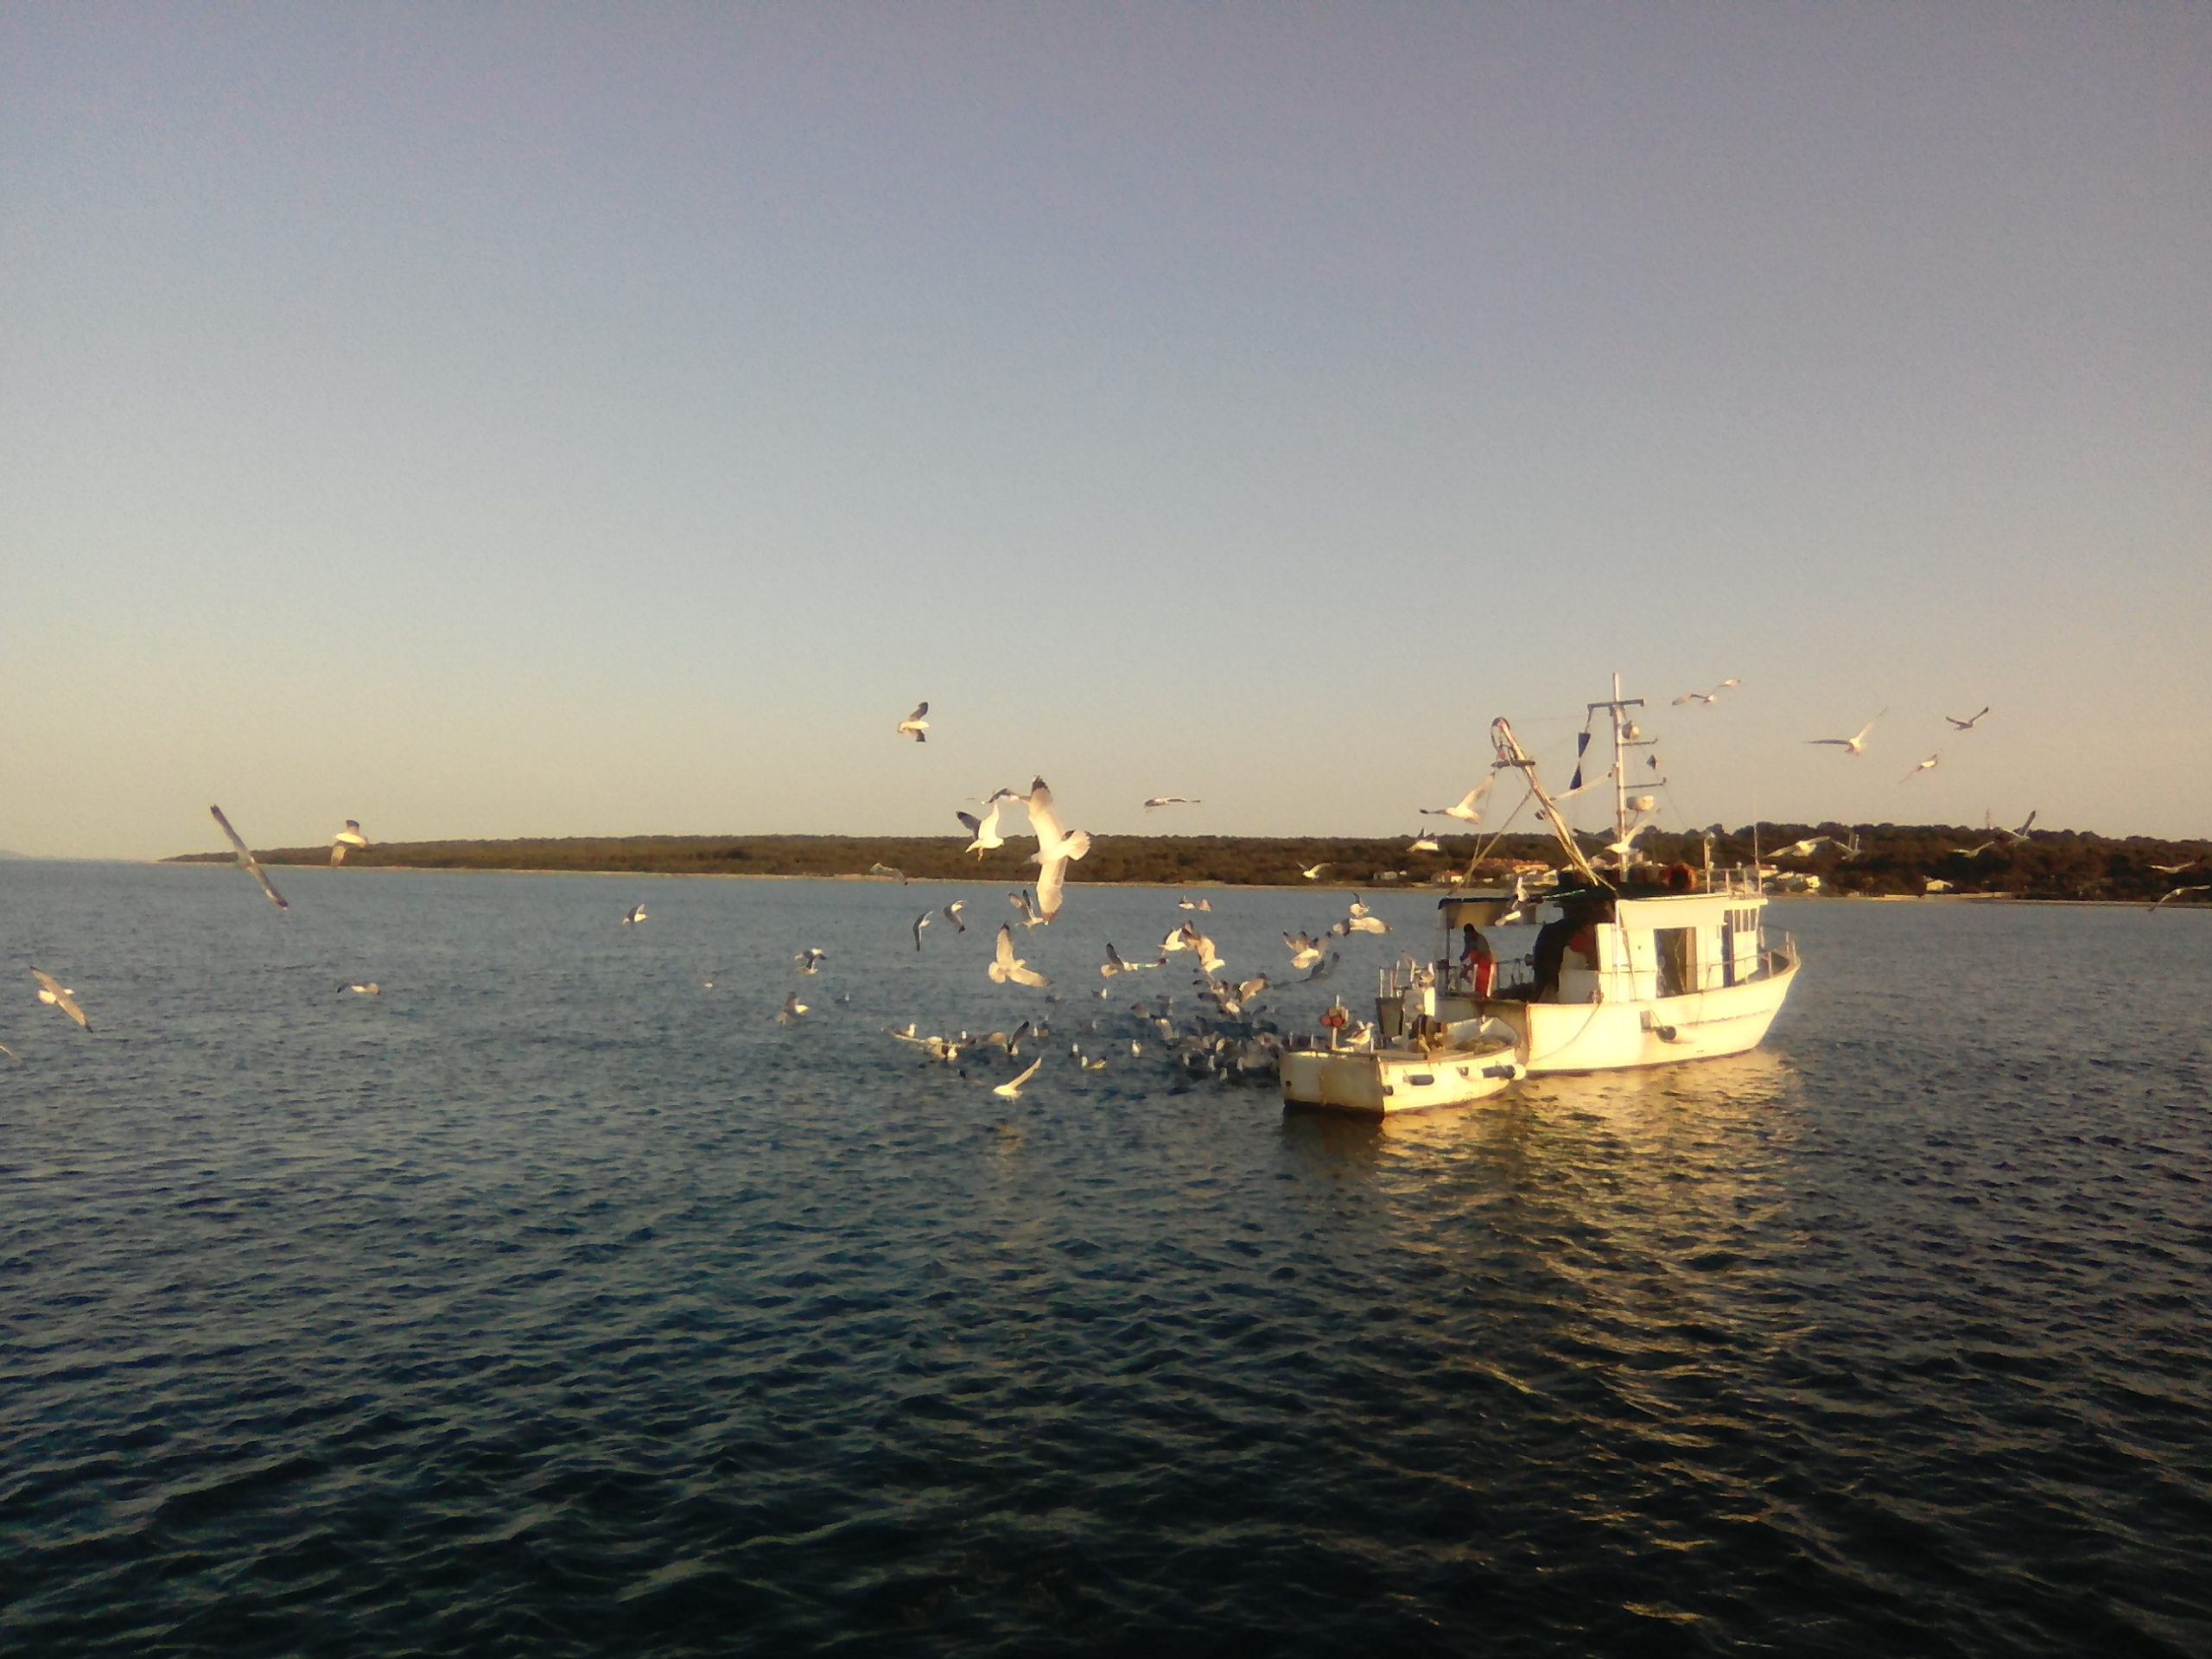 Seagulls clamouring for a fisherman’s catch as he is returning to Silba’s harbour of Mul in the evening.